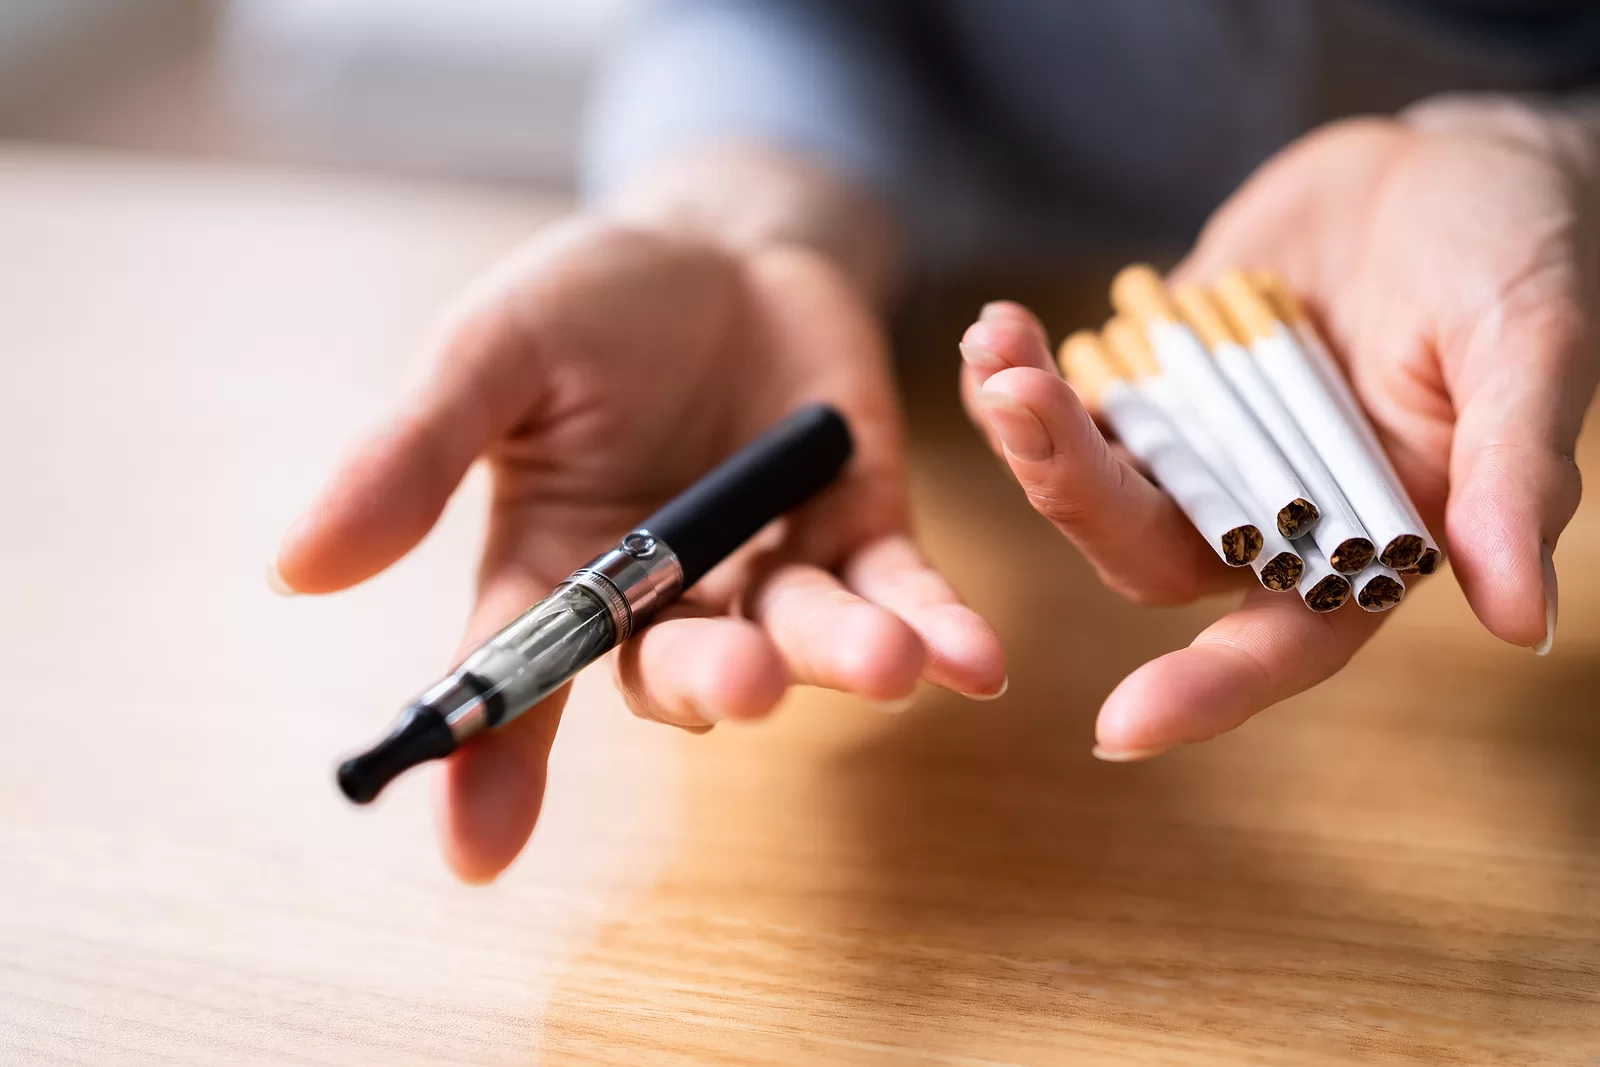 Woman's Hand Holding Vape And Tobacco Cigarettes